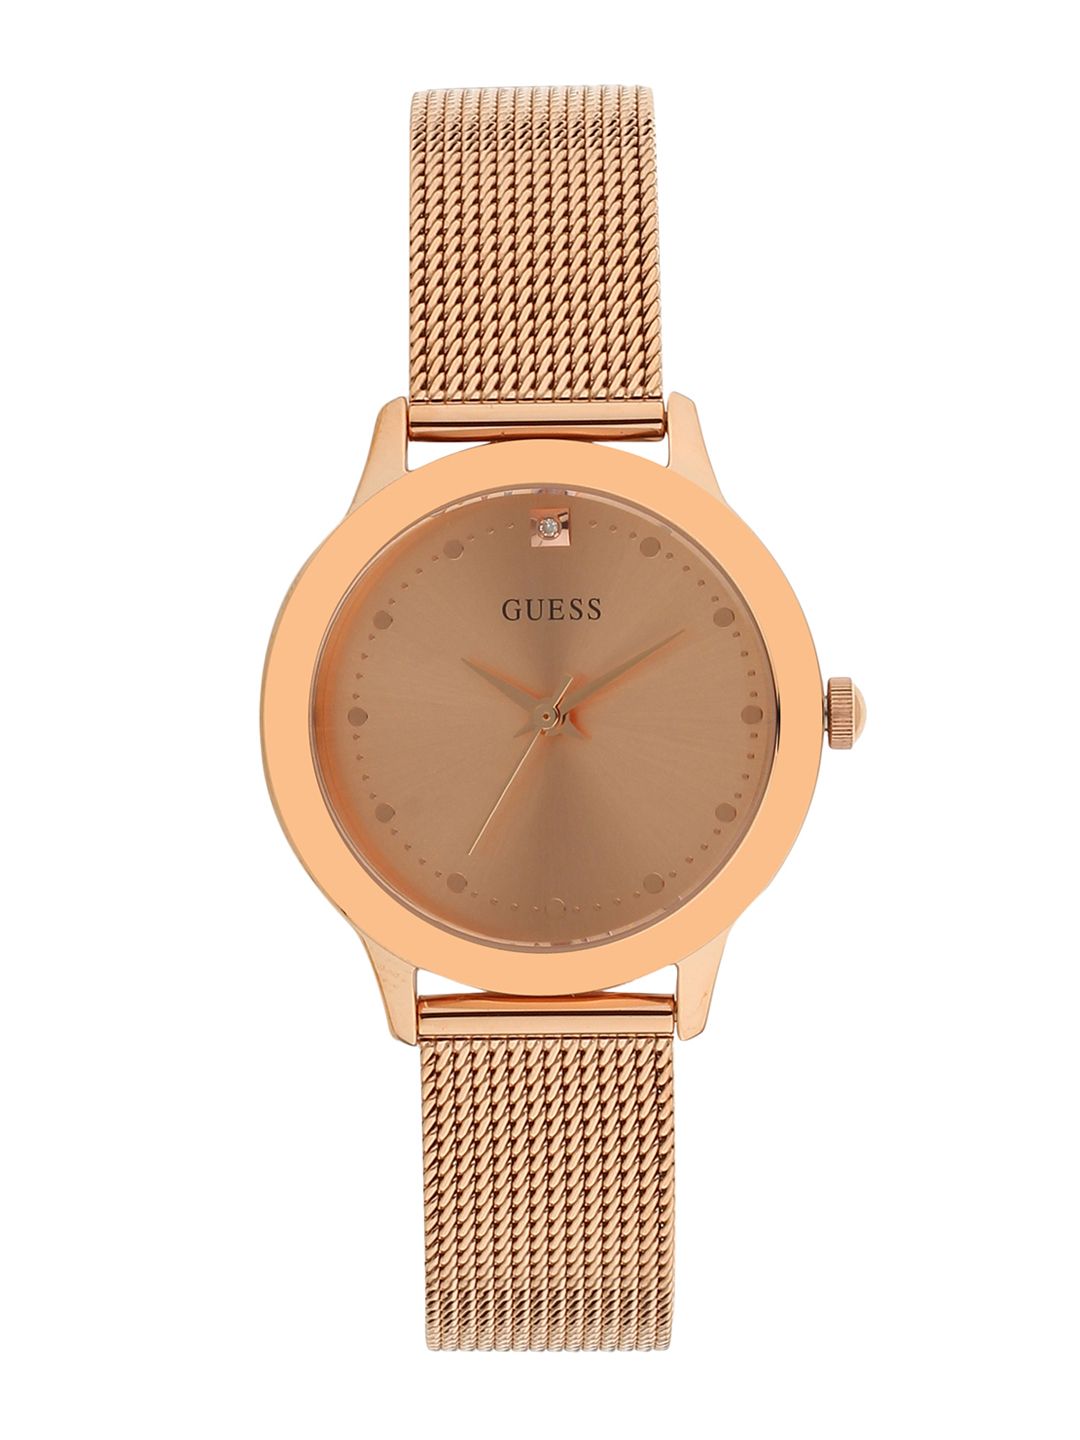 GUESS Women Rose Gold Analogue Watch W1197L6 Price in India